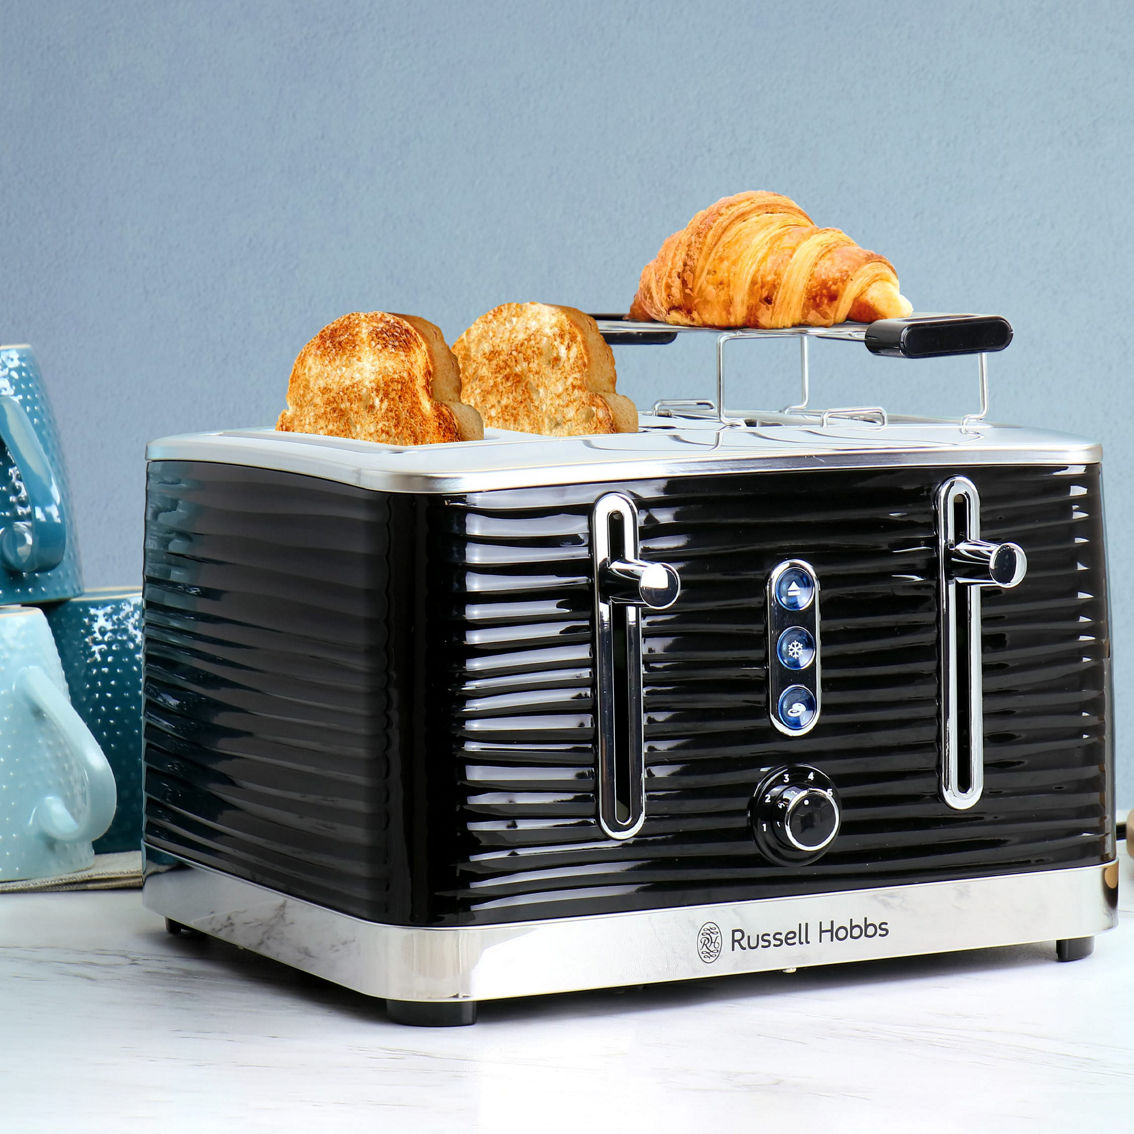 Russell Hobbs Retro Style 4 Slice Toaster in Black - Image 5 of 5